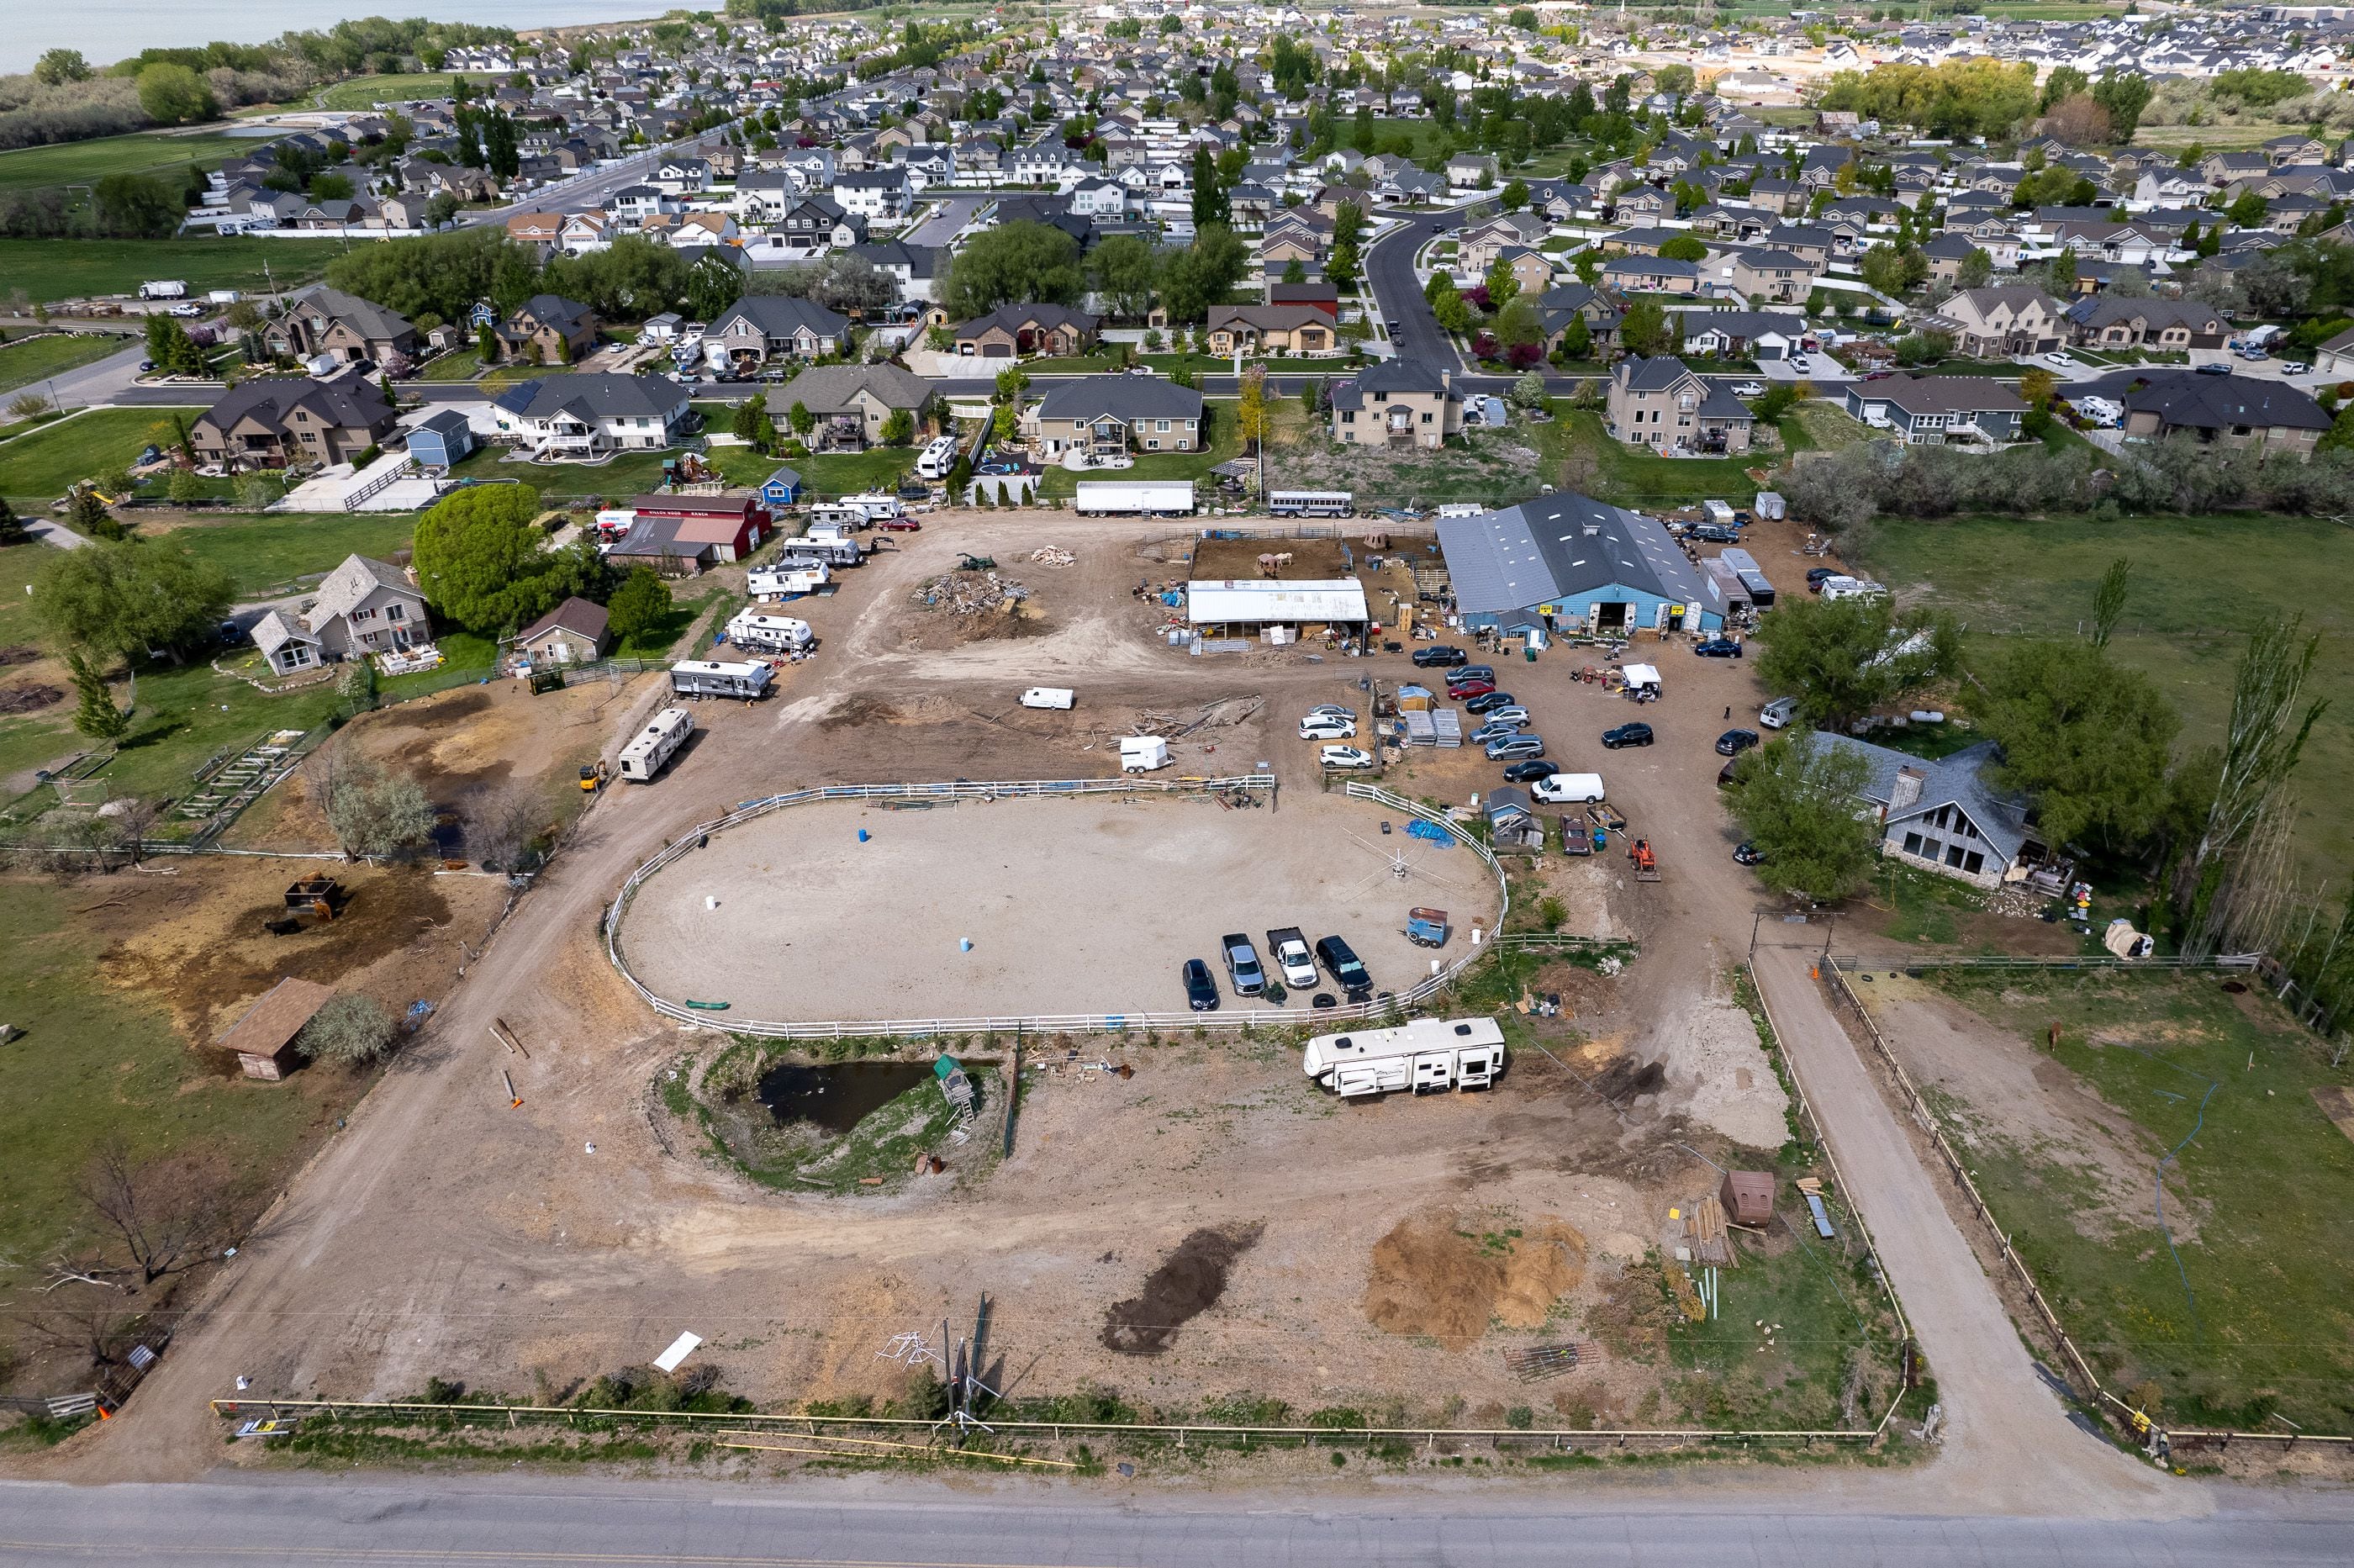 (Trent Nelson | The Salt Lake Tribune) The Lehi Farmers Market property in Utah County, and neighboring homes, on Saturday, May 13, 2023.